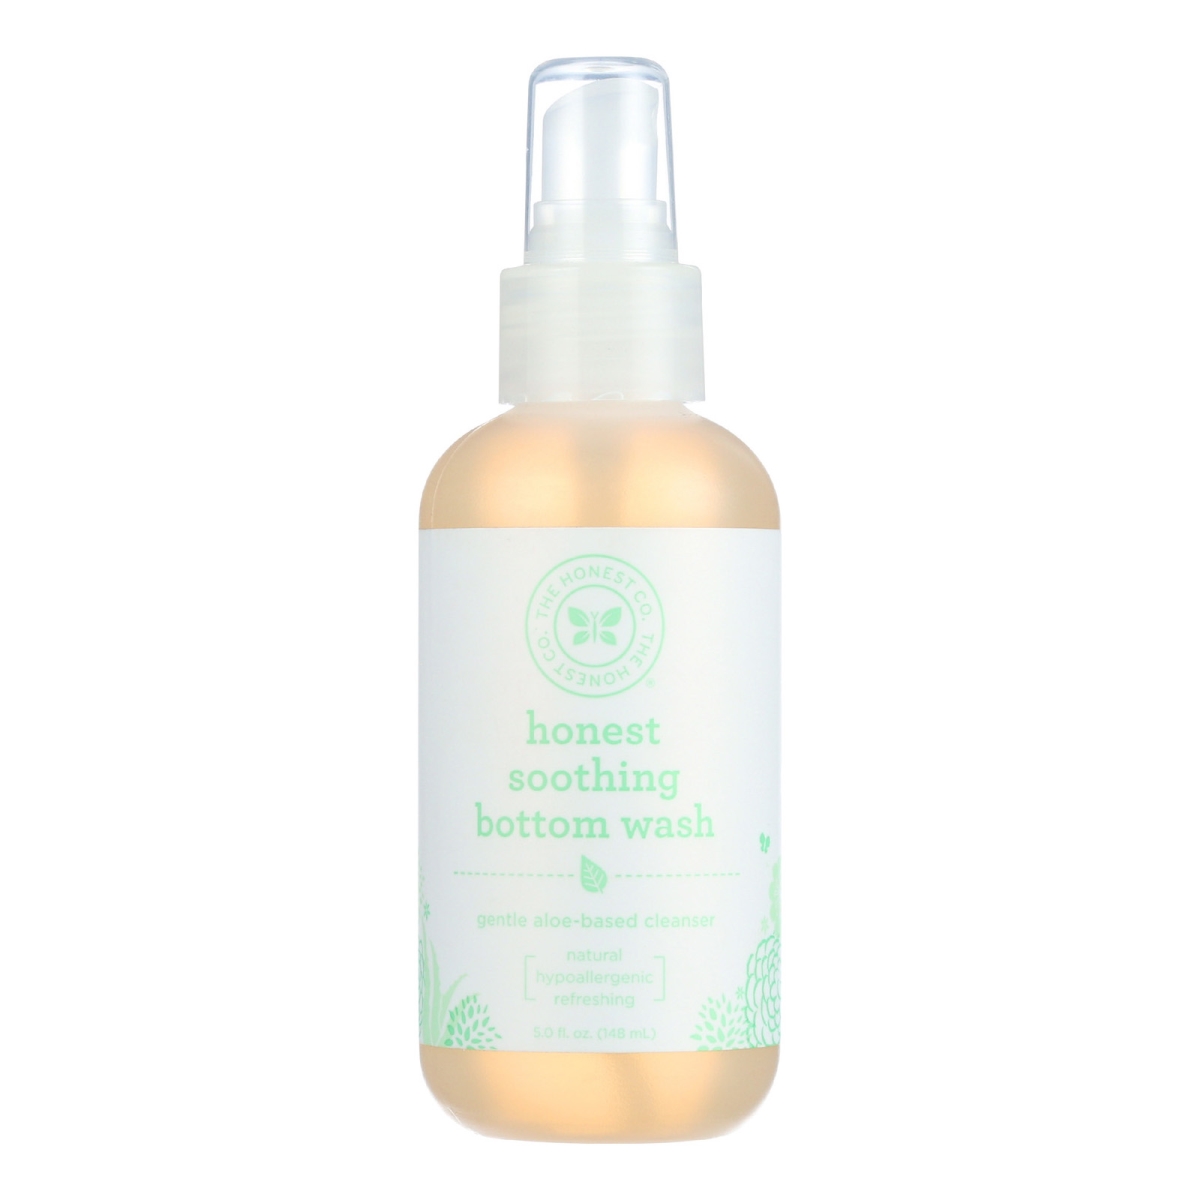 The Honest 1616473 5 Oz Soothing Bottom Wash